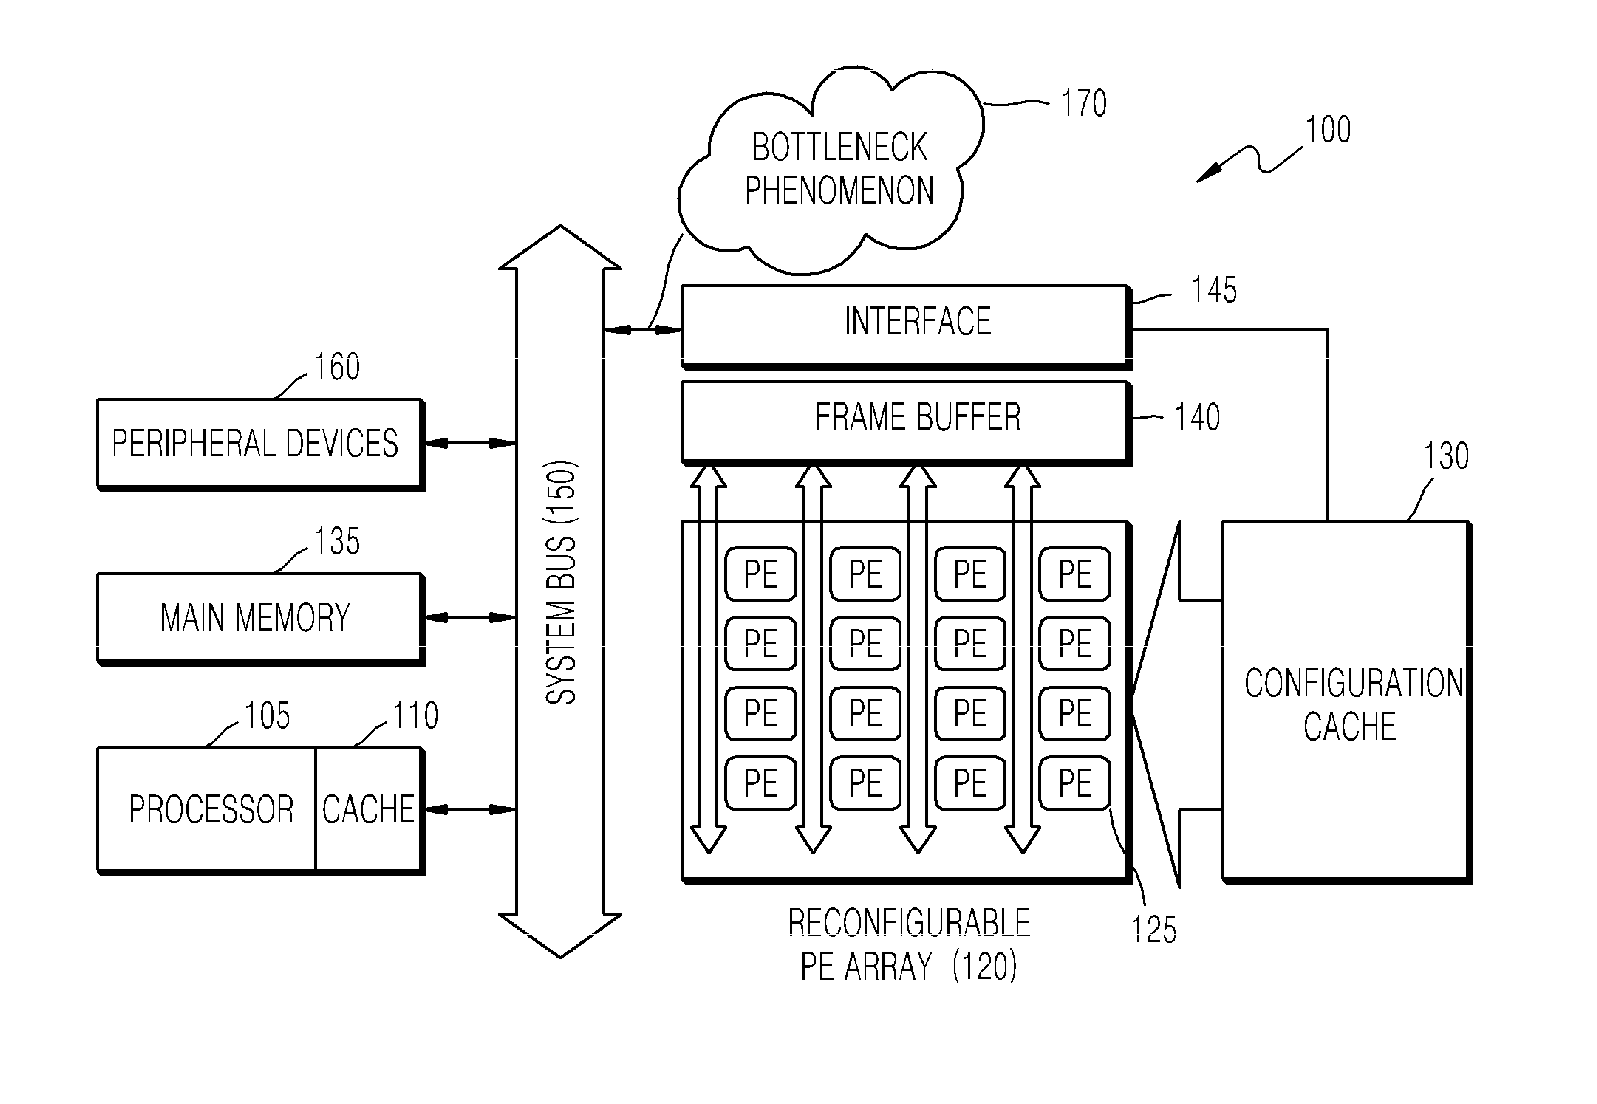 Memory-centered communication apparatus in a coarse grained reconfigurable array